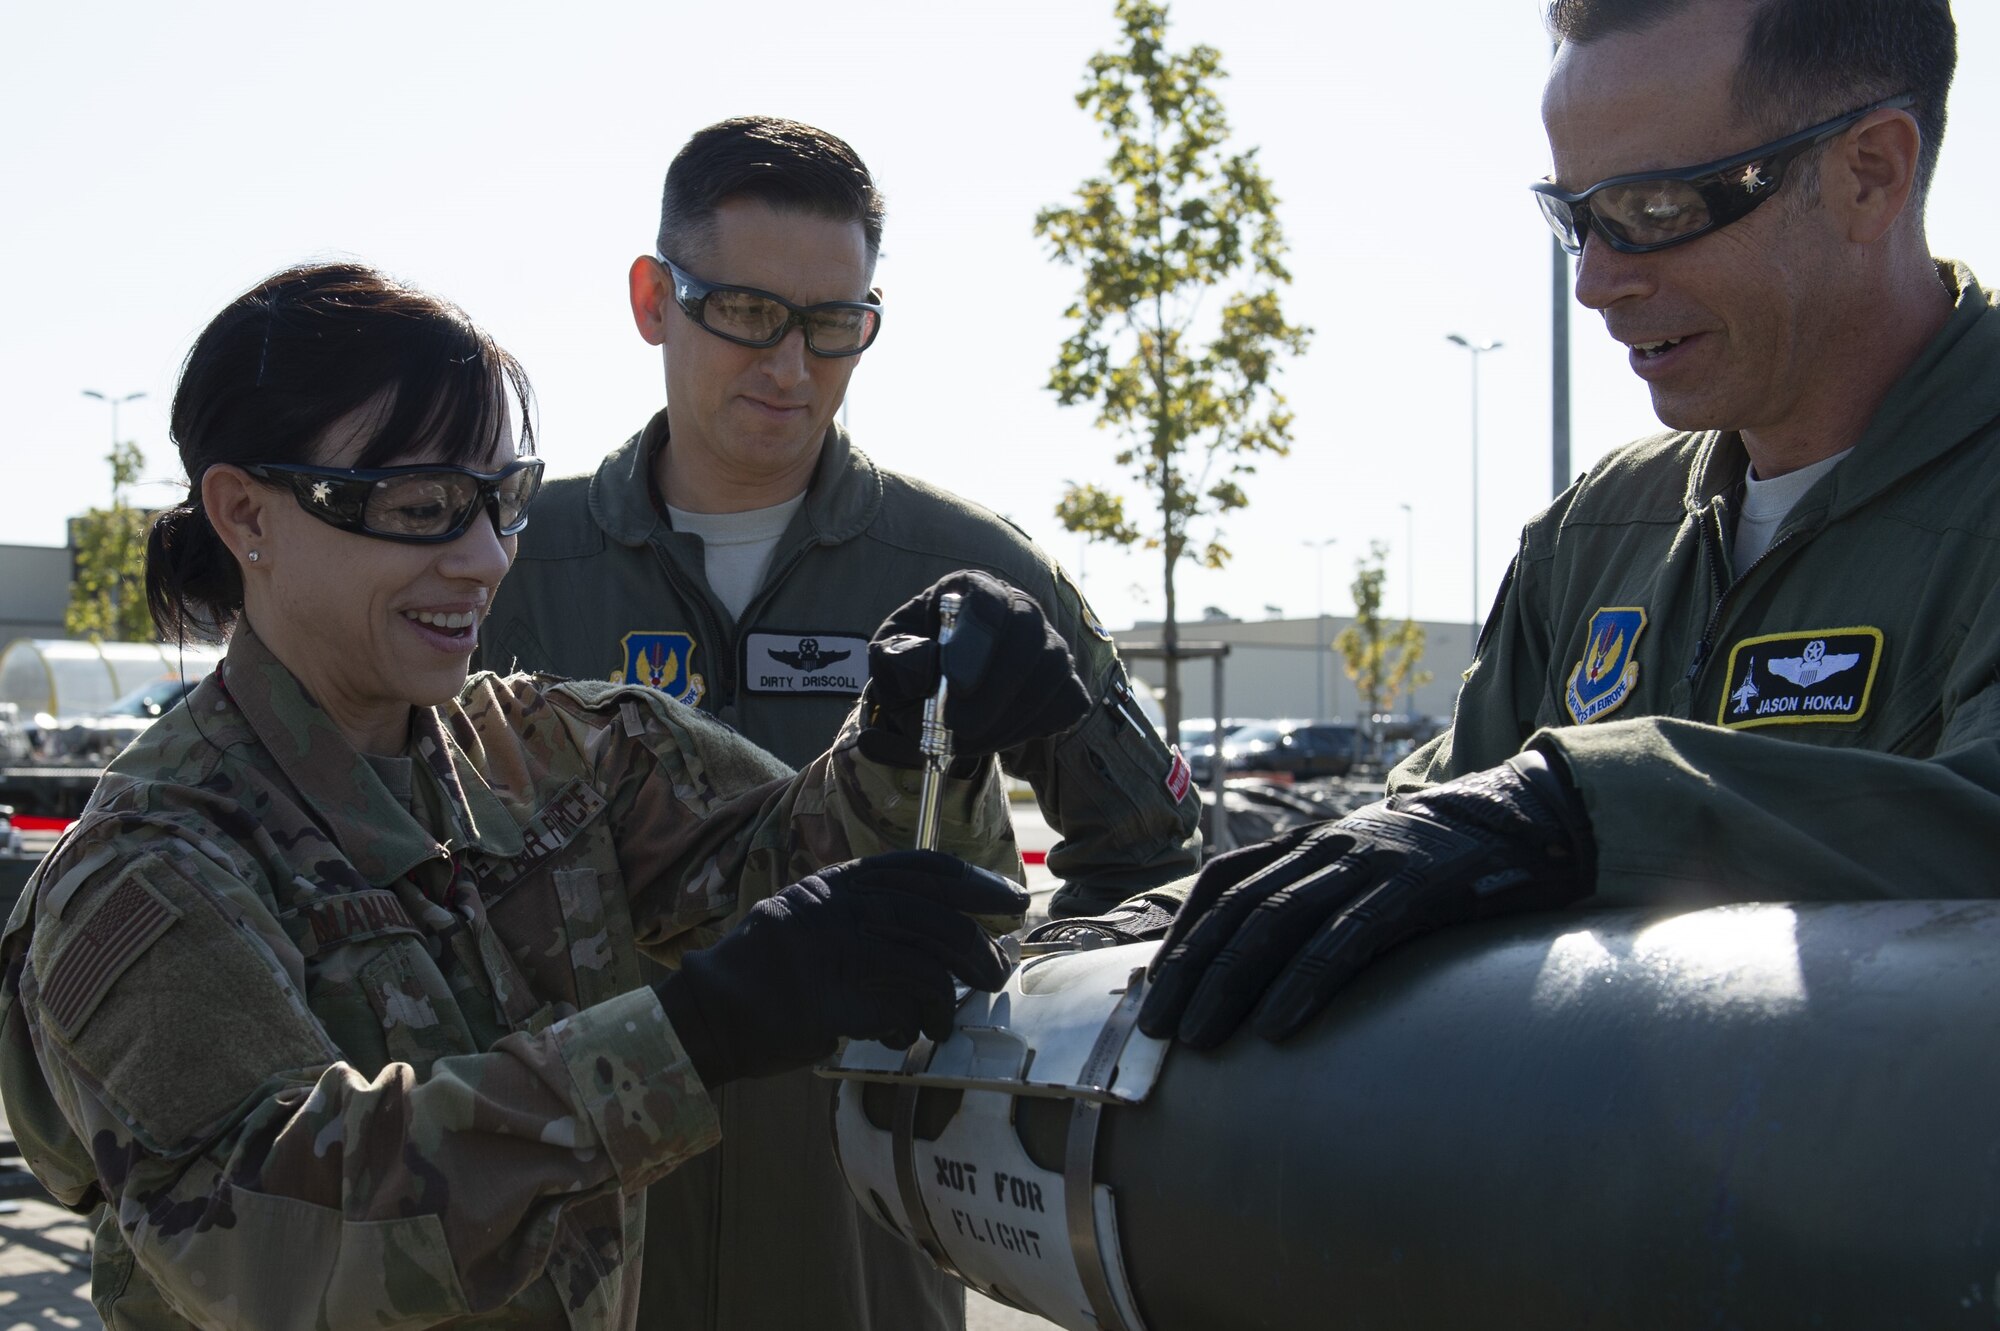 Airman from various career fields competed for best time on building an inert bomb.